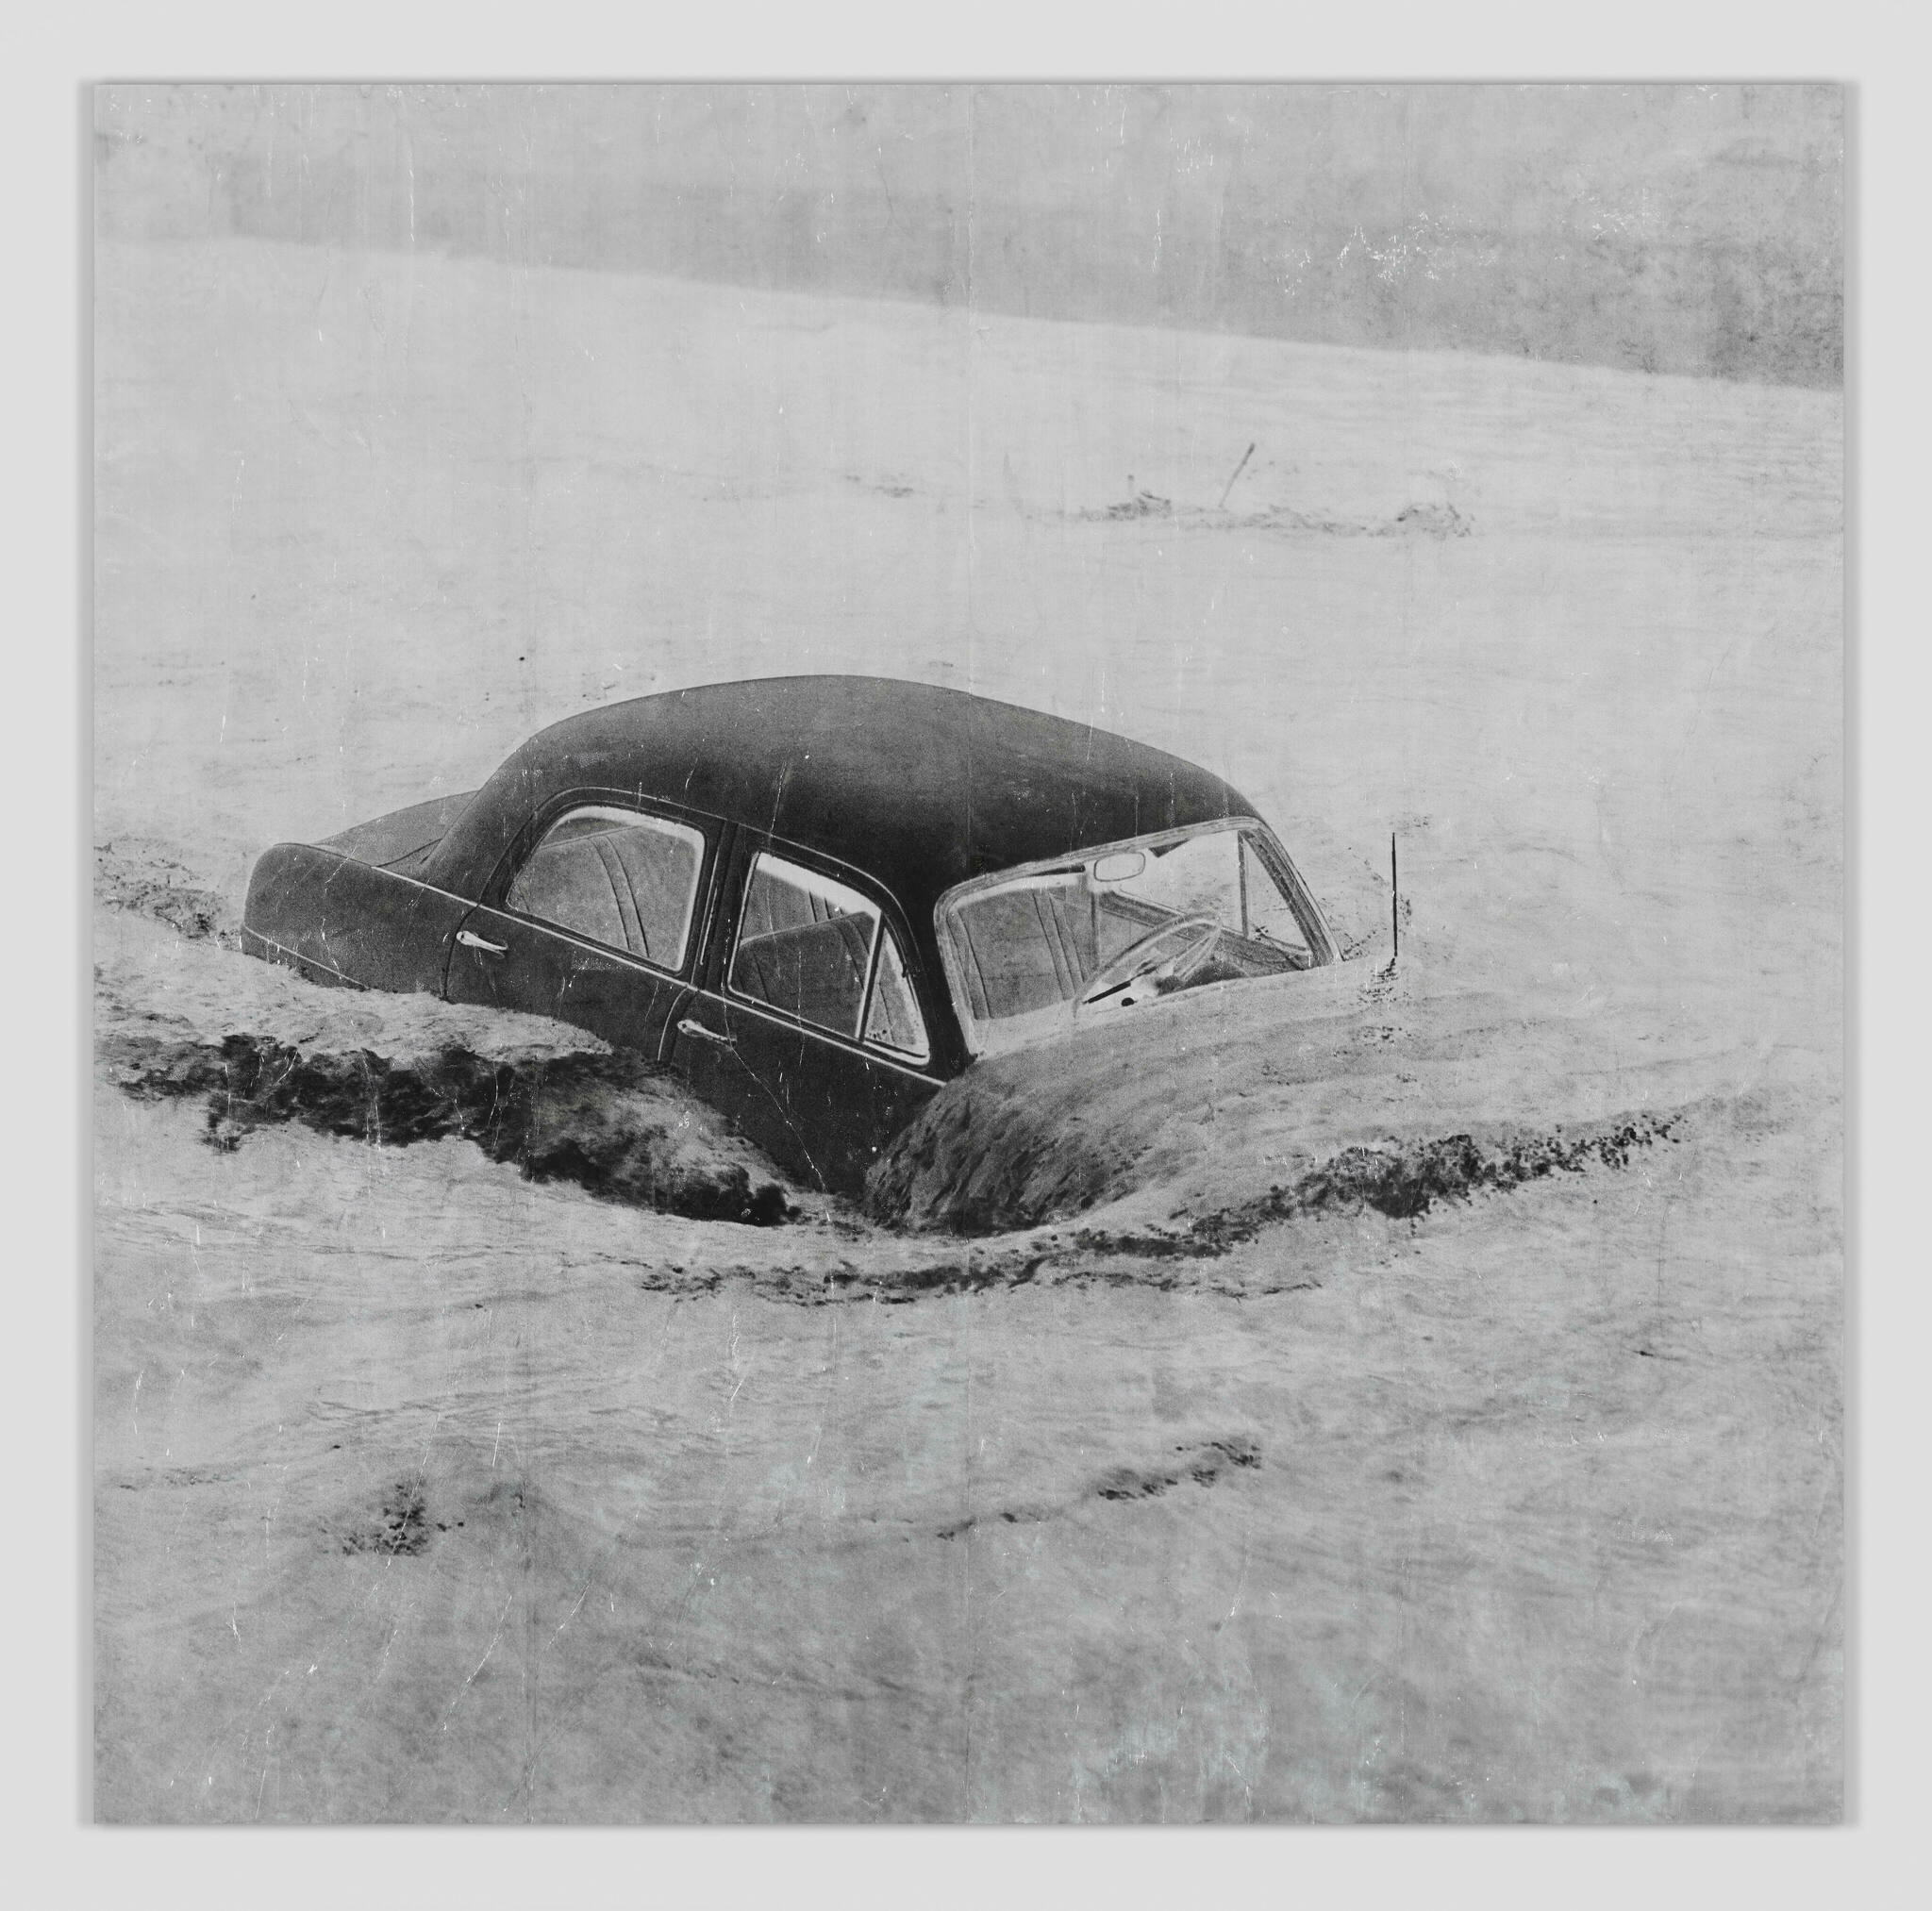 A black and white photo of a car being overtaken by flood waters.